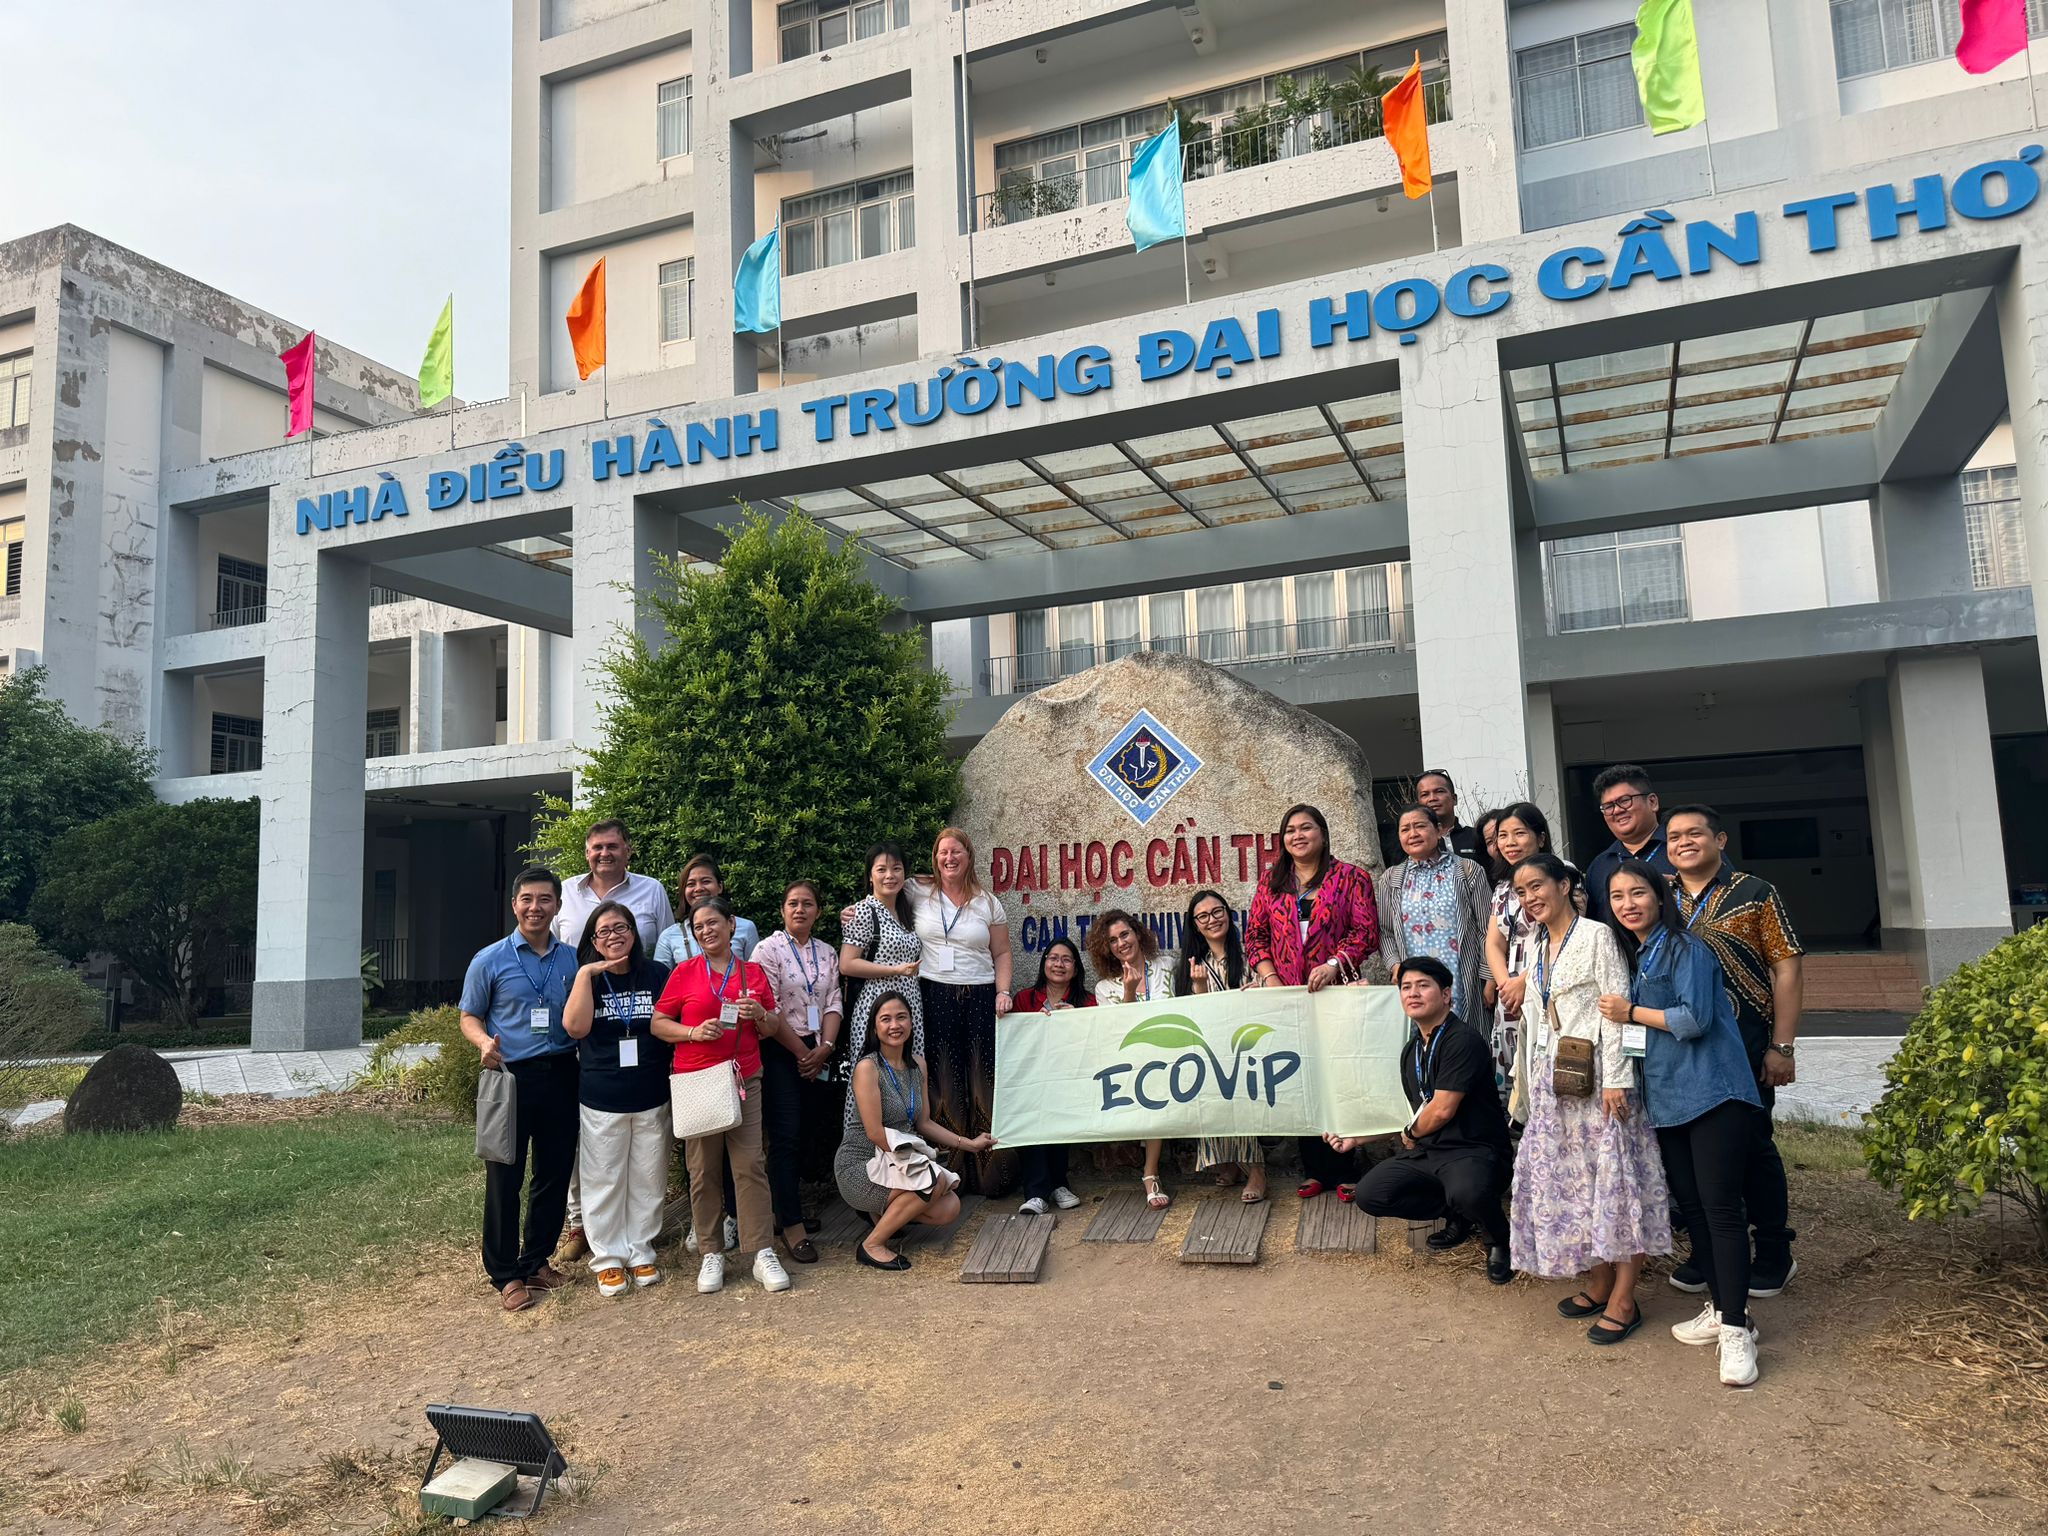 Participants posing in front of Can Tho University sign with ECOVIP flag